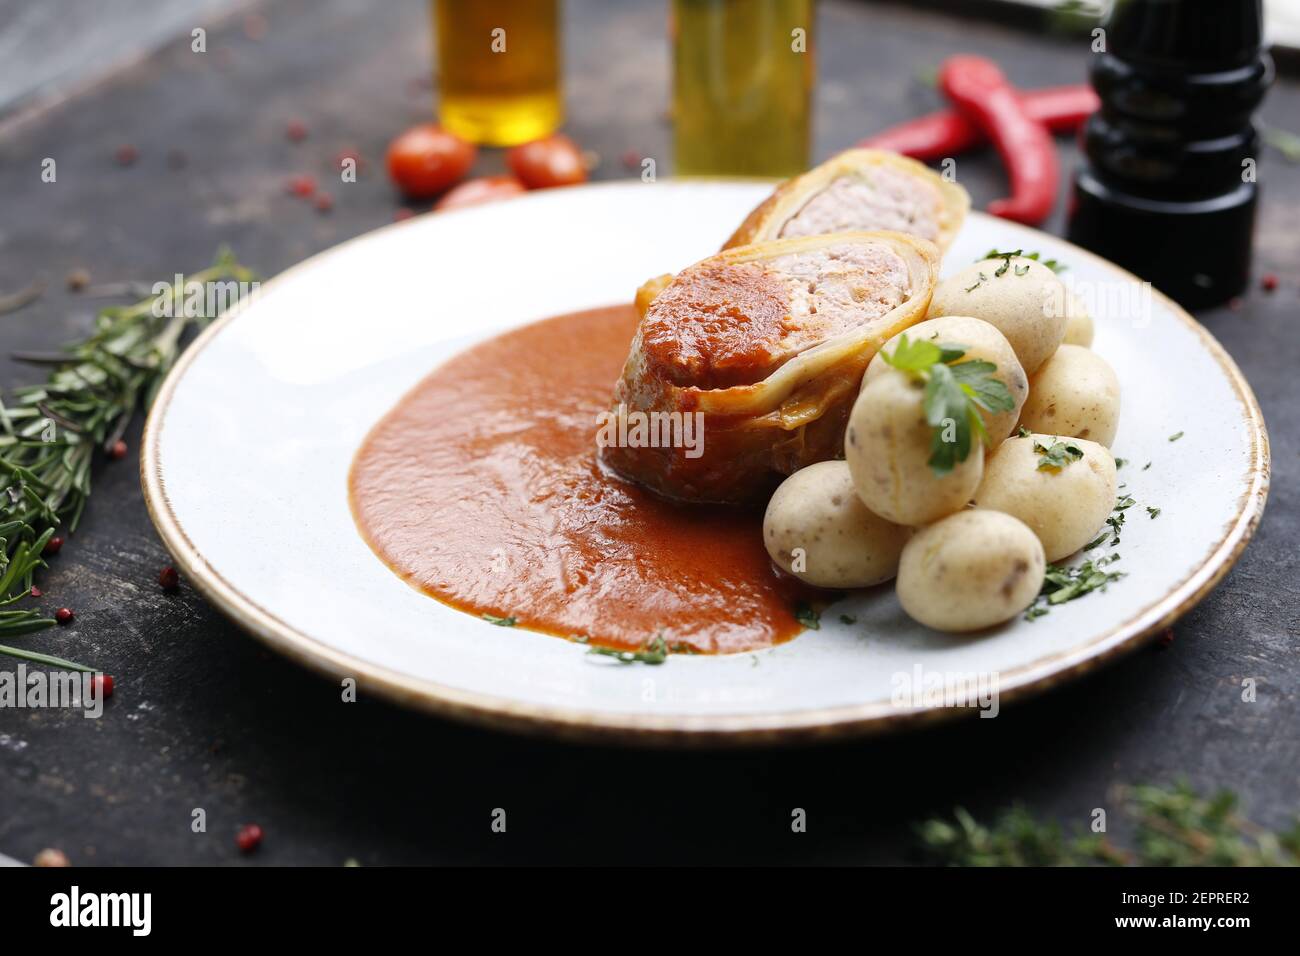 Stuffed cabbage with minced meat in tomato sauce served with potatoes. Ready dish served on a plate. Serving proposal, culinary photography. Stock Photo